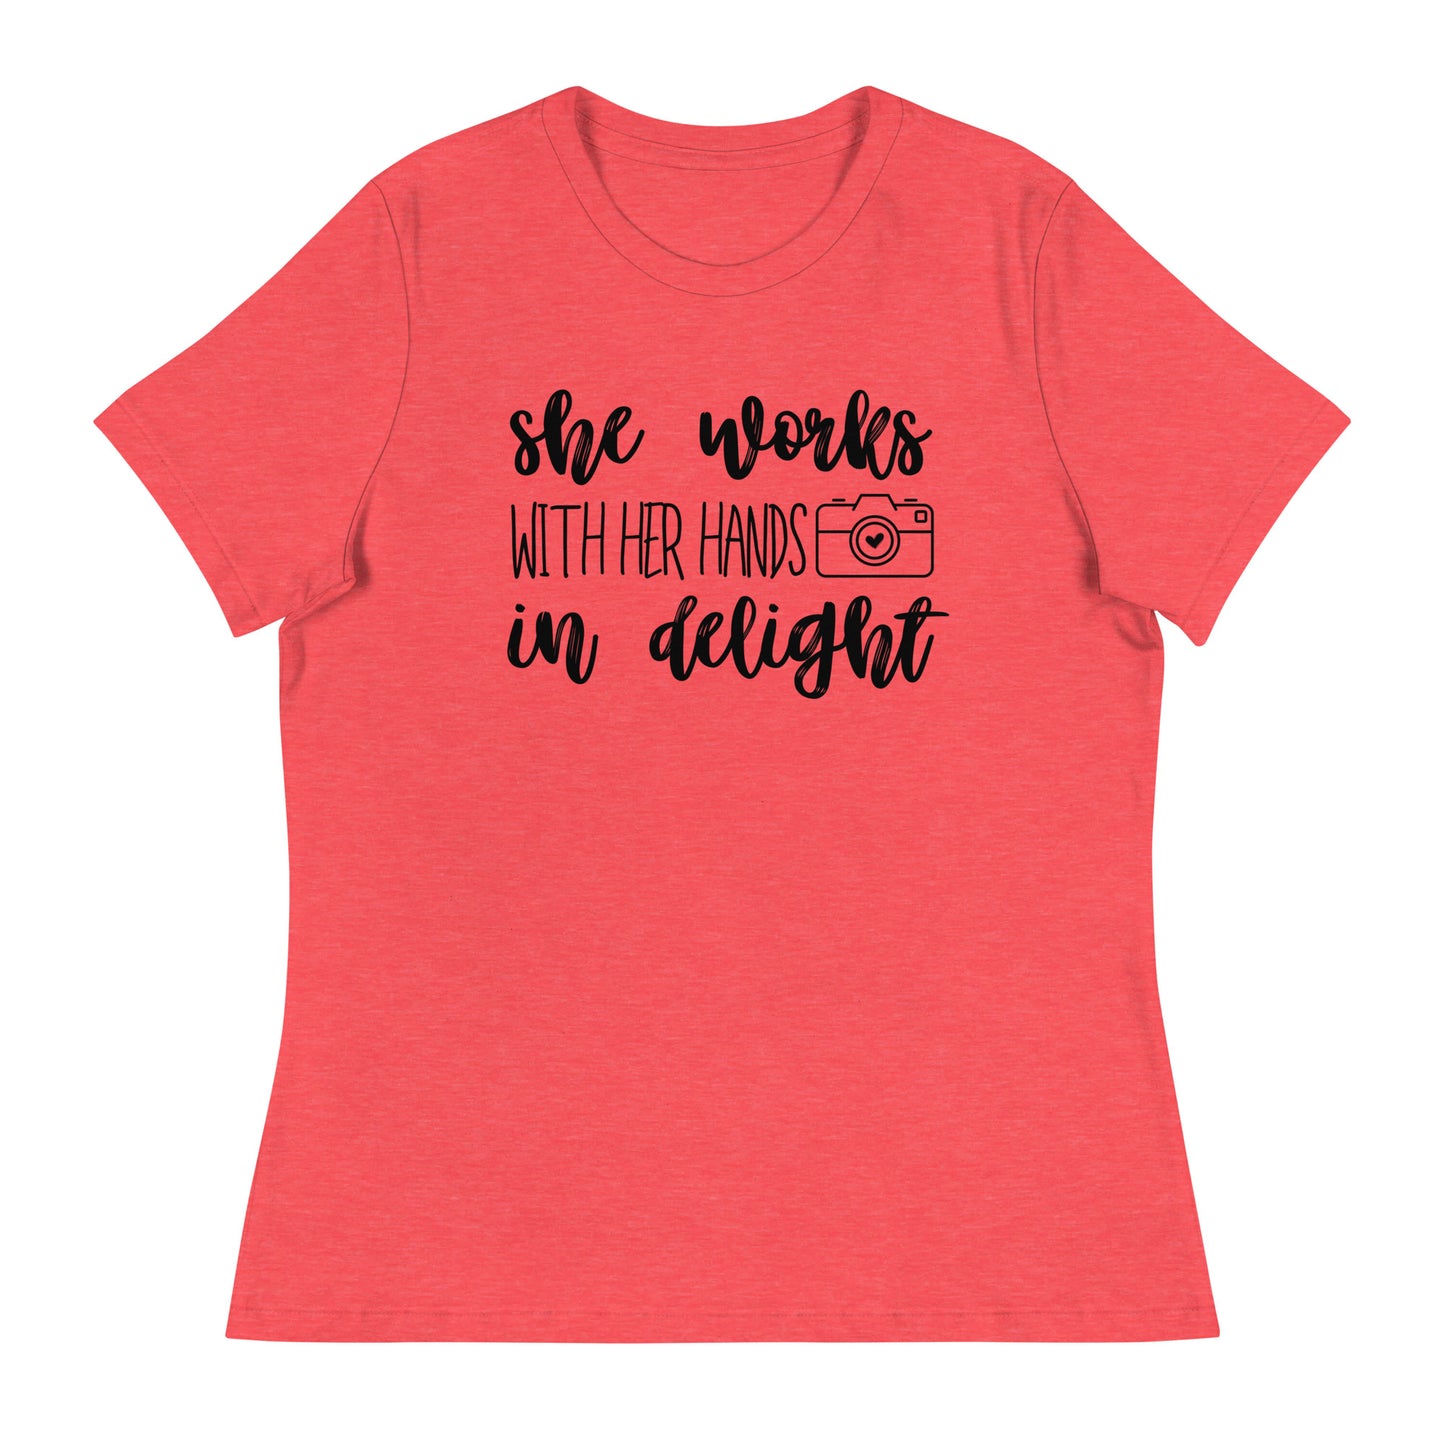 Girl Tees -She works with her hands - Black Logo